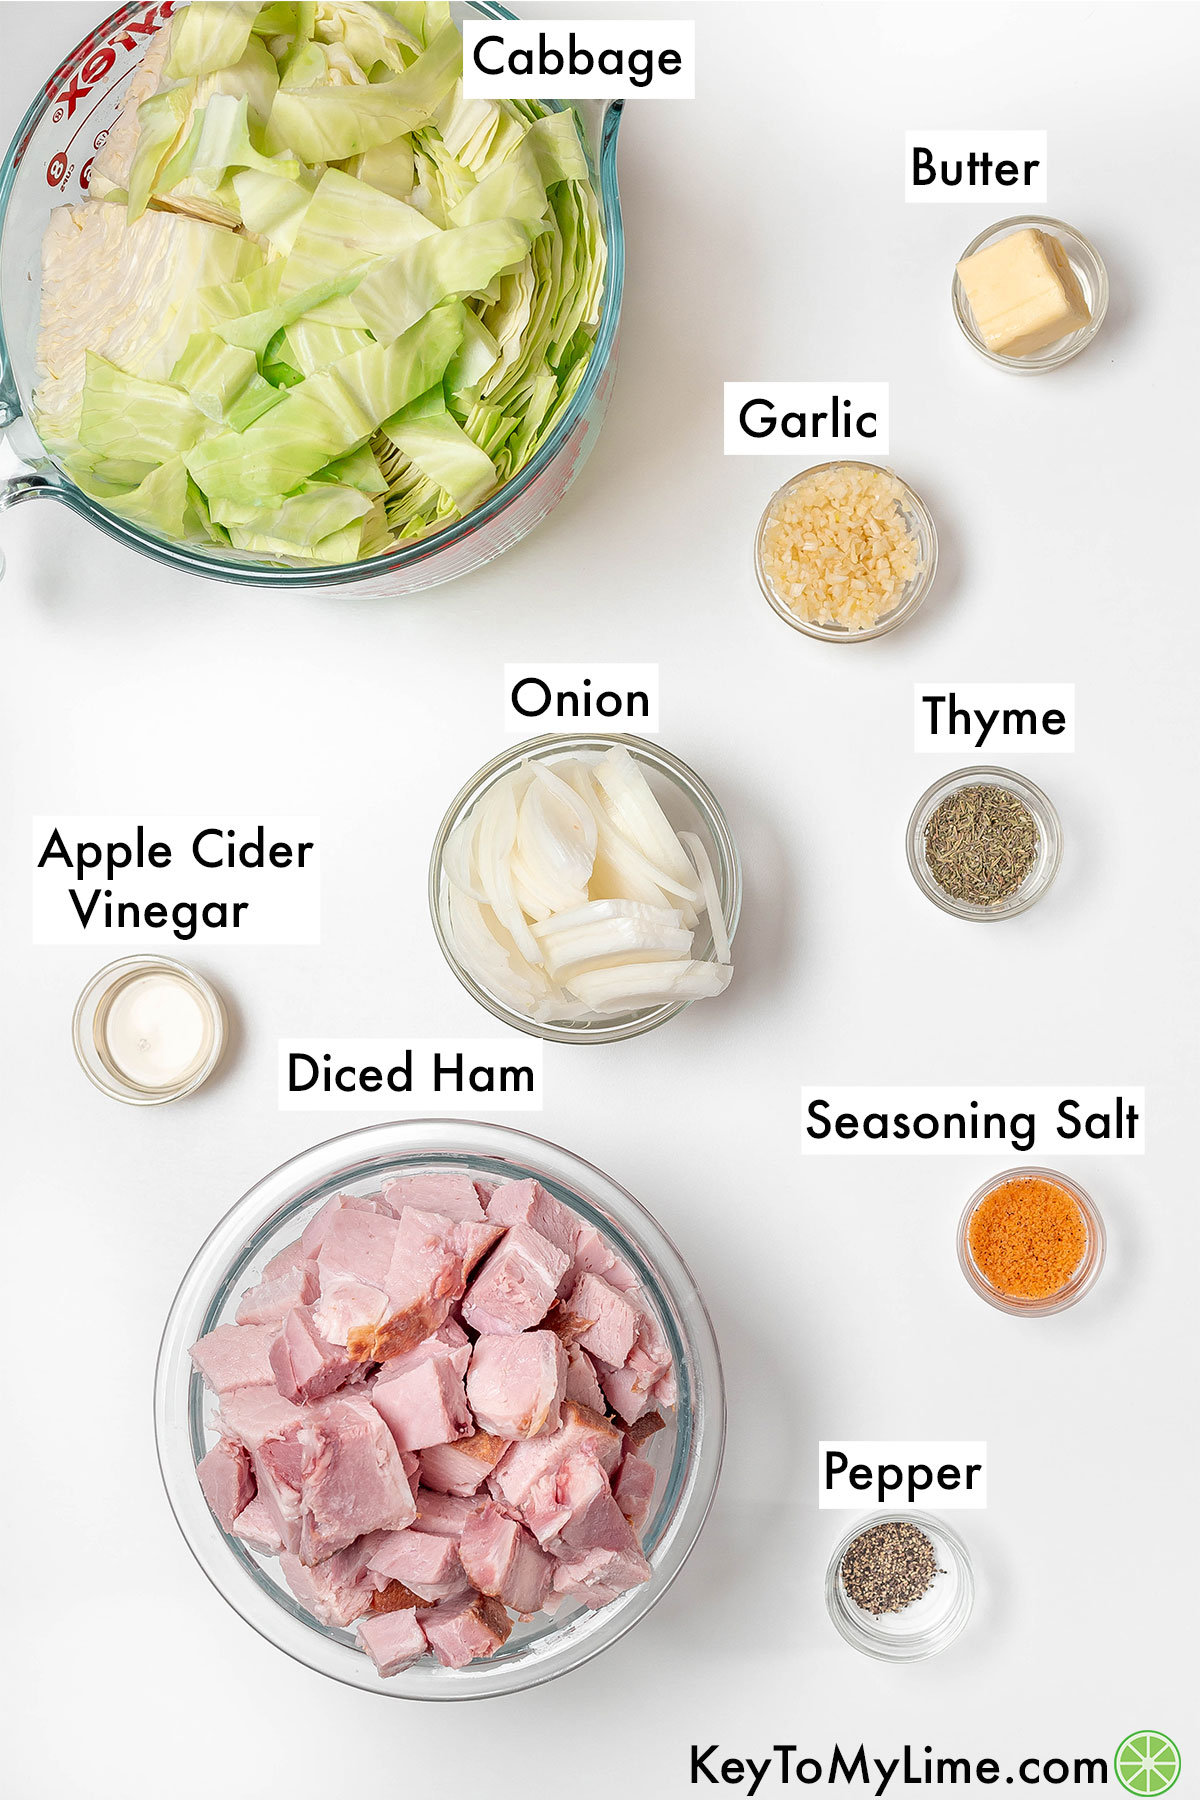 The labeled ingredients for ham and cabbage.